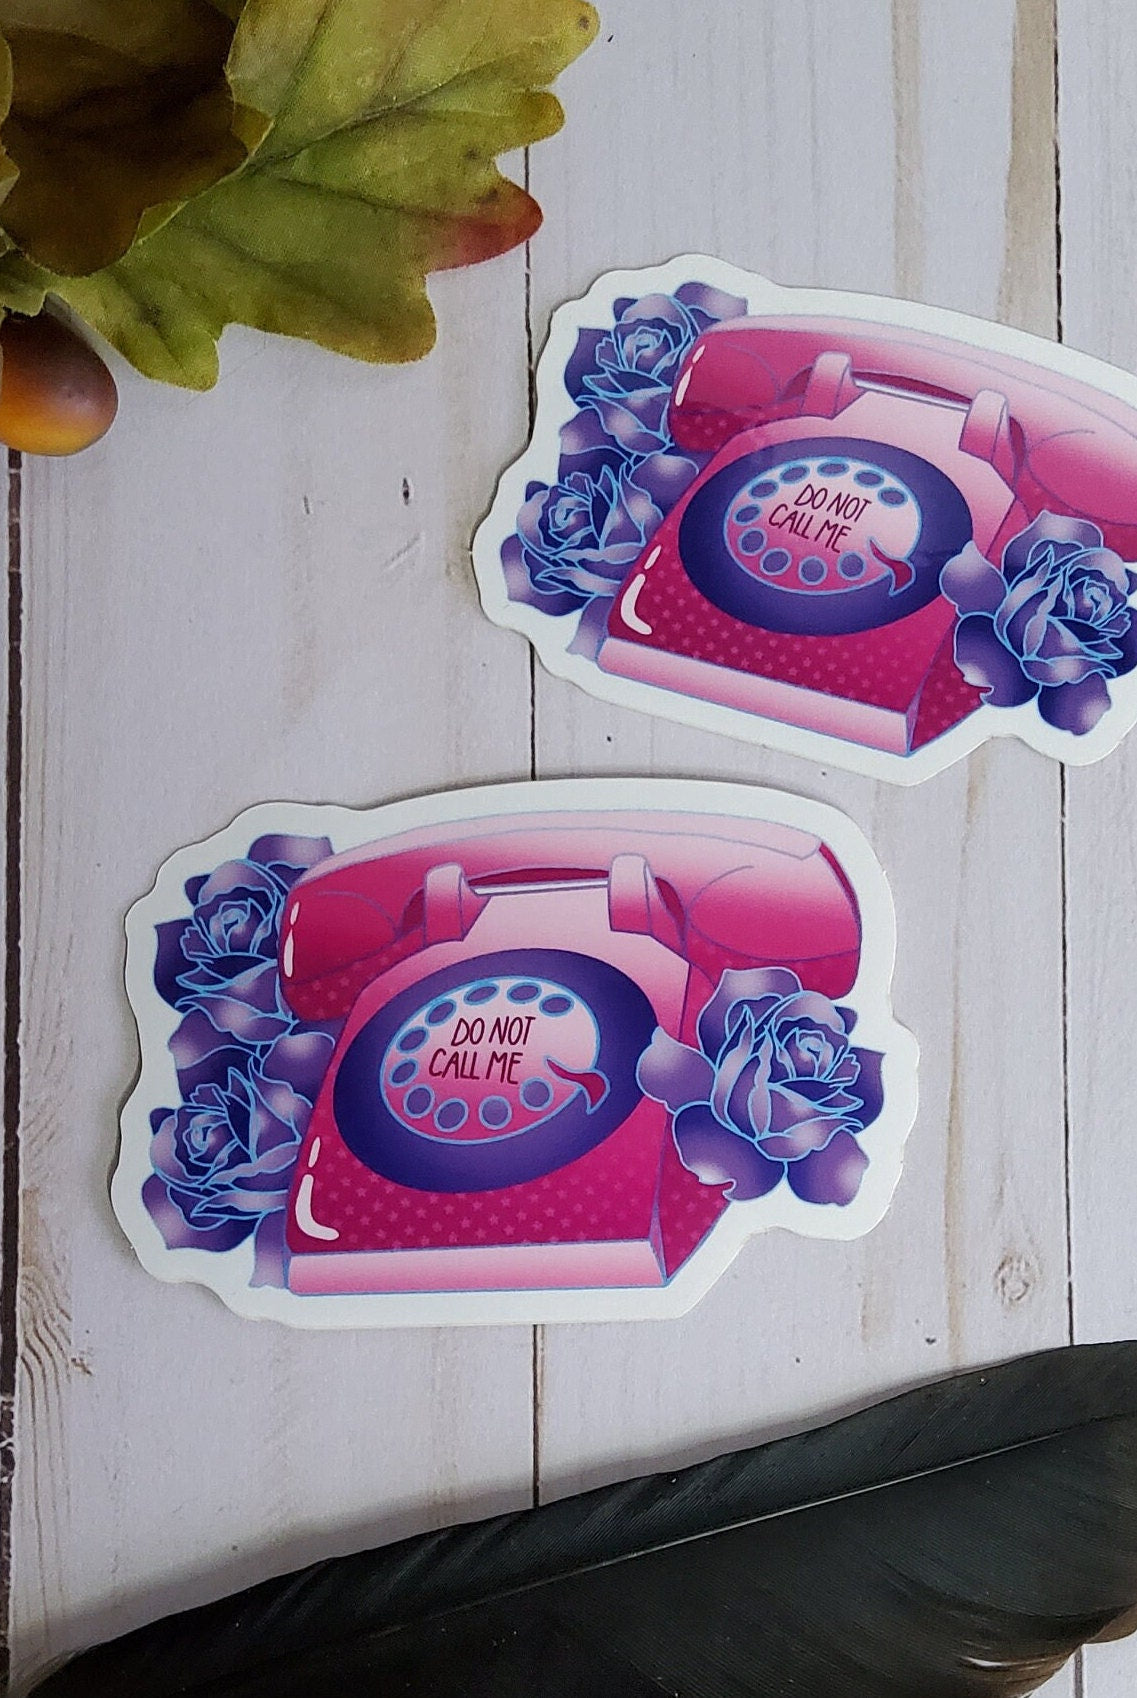 GLOSSY STICKER: Pastel Pink Don't Call Me Rotary Phone , Rotary Phone Sticker , Pink Phone Sticker , Retro Phone Sticker, Pink Phone Sticker